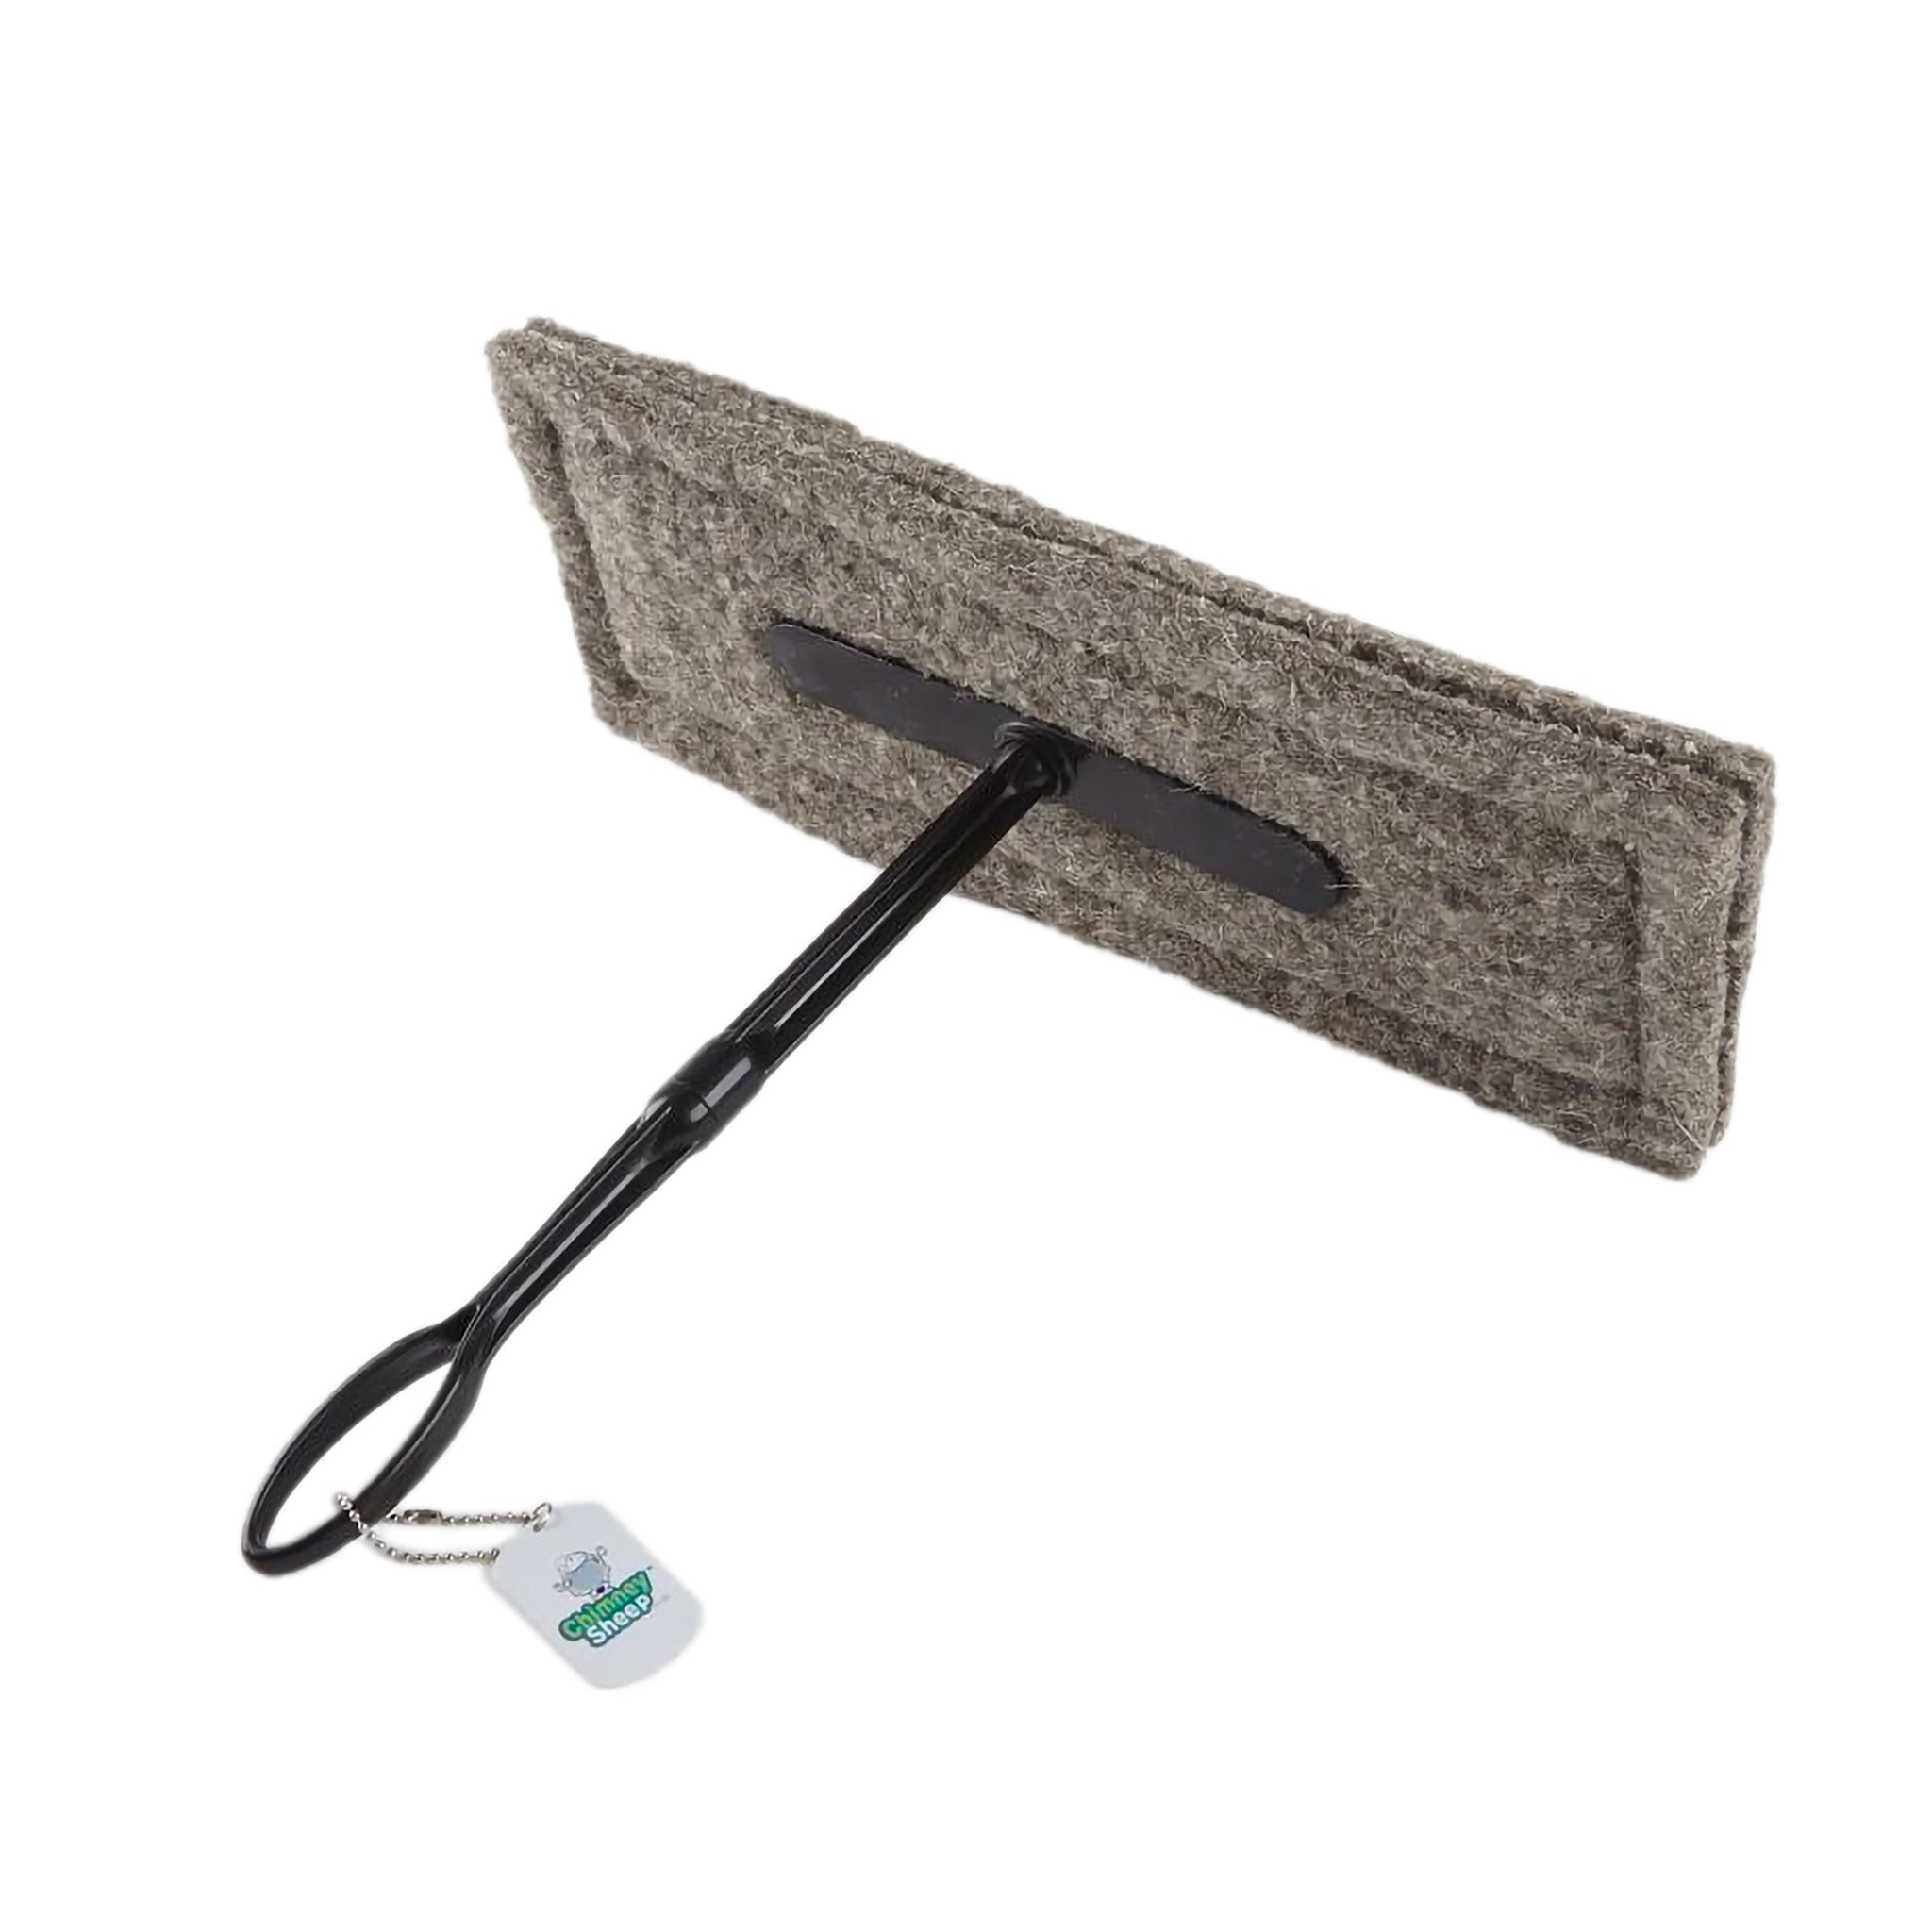 Rectangular wool draught stopper for a chimney with an extended handle.